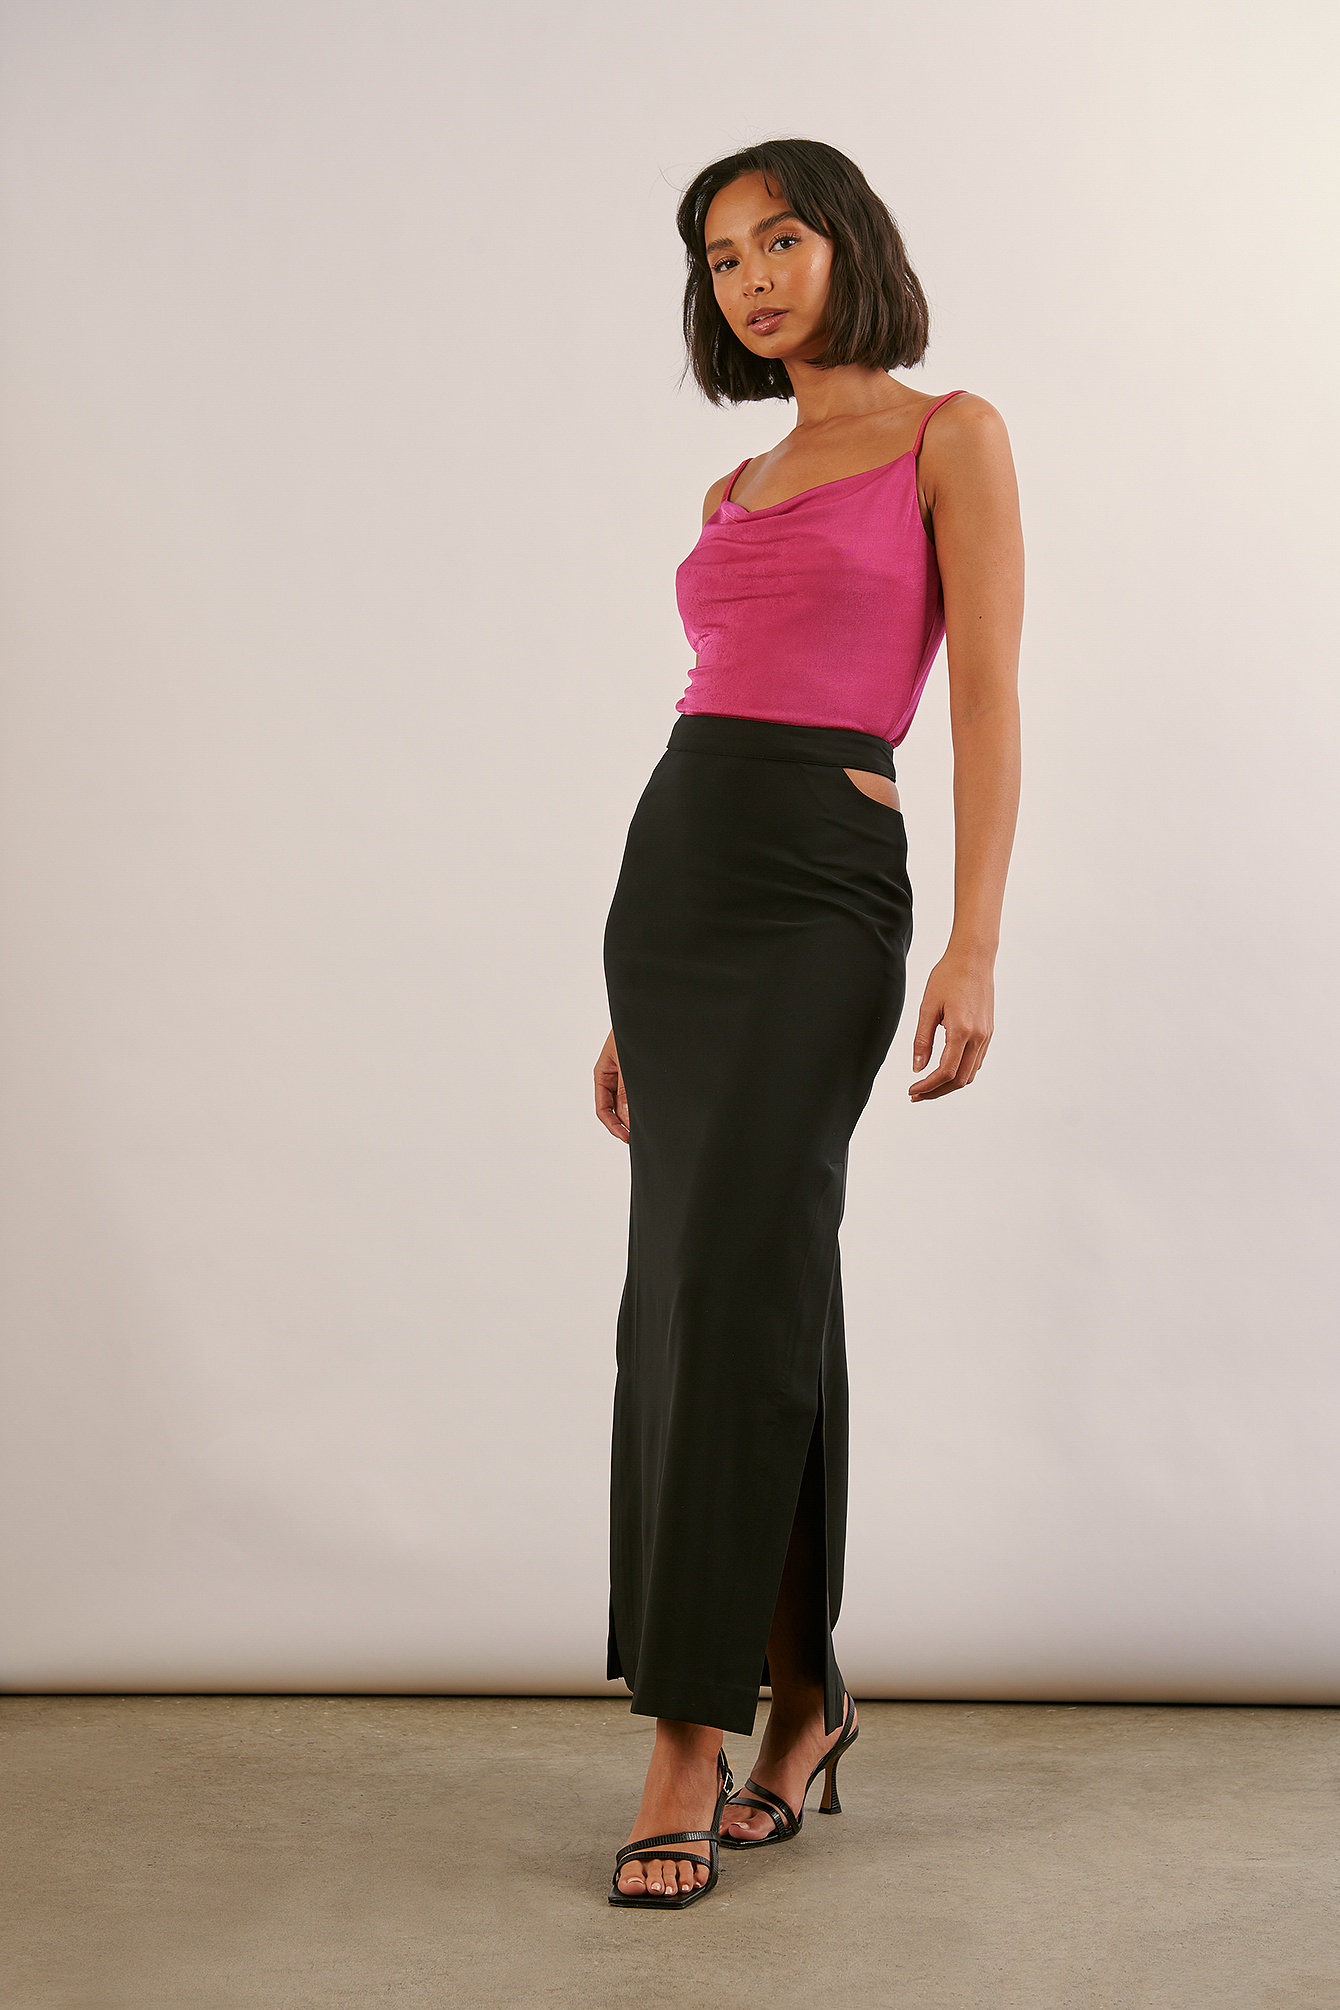 Recycled Cut Out Maxi Skirt Outfit.